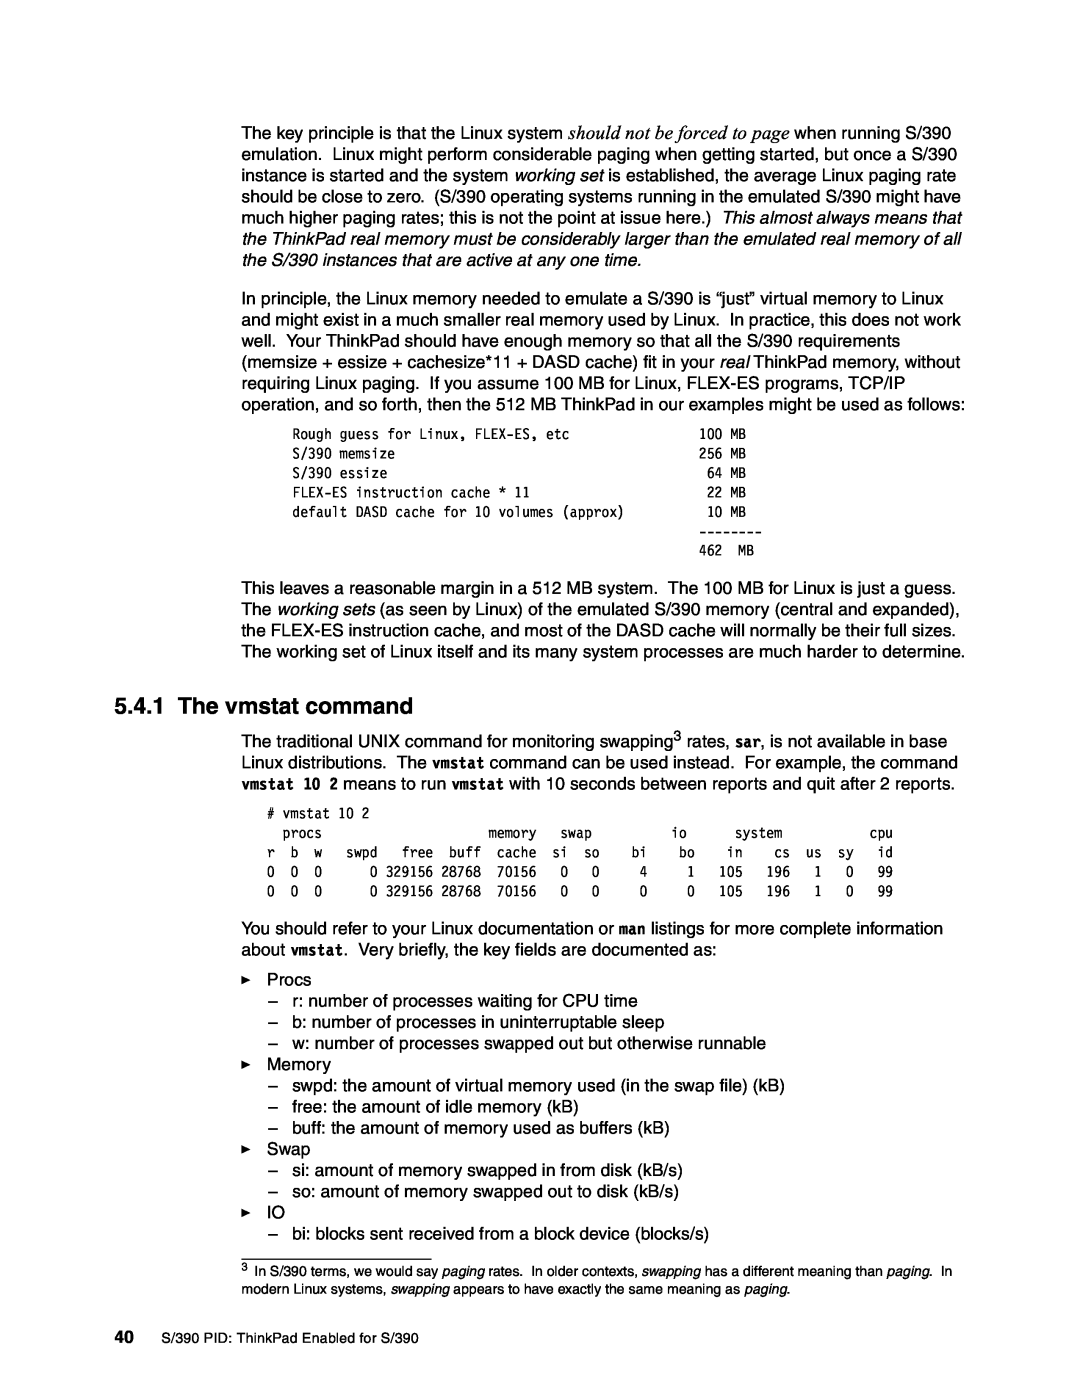 IBM s/390 manual The vmstat command 